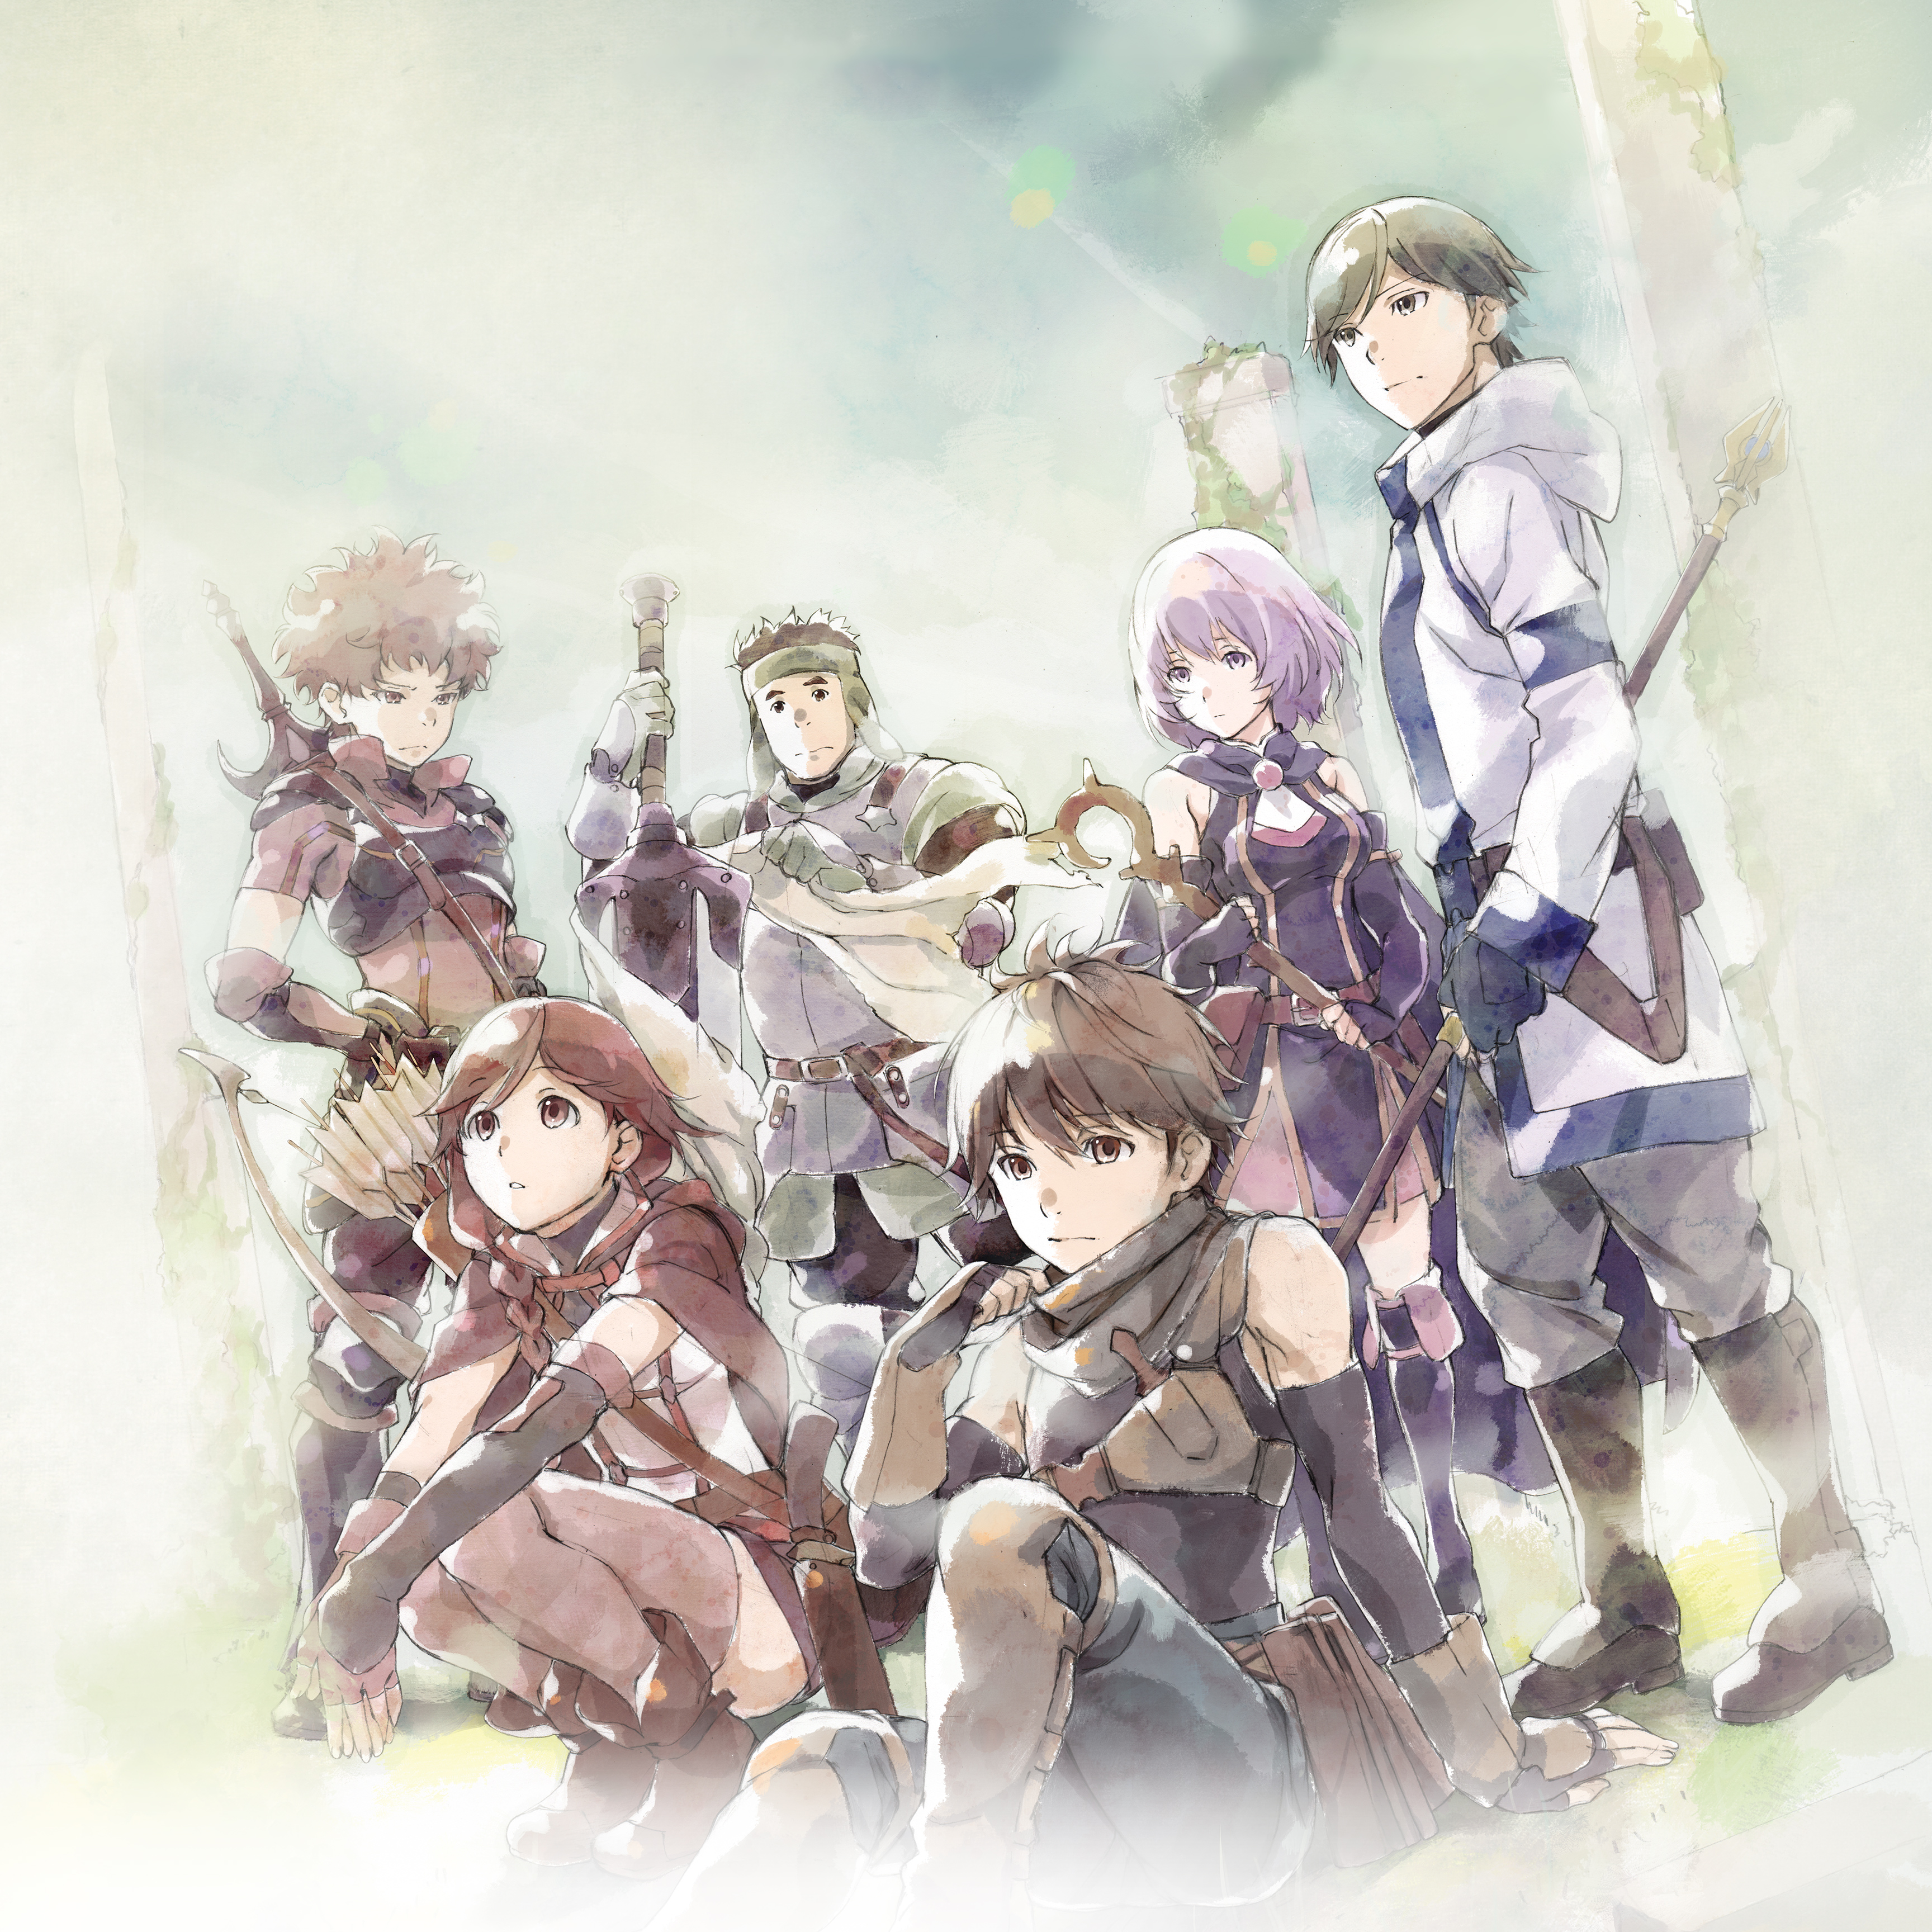 Watch Grimgar Ashes And Illusions Sub Dub Action Adventure Fantasy Anime Funimation